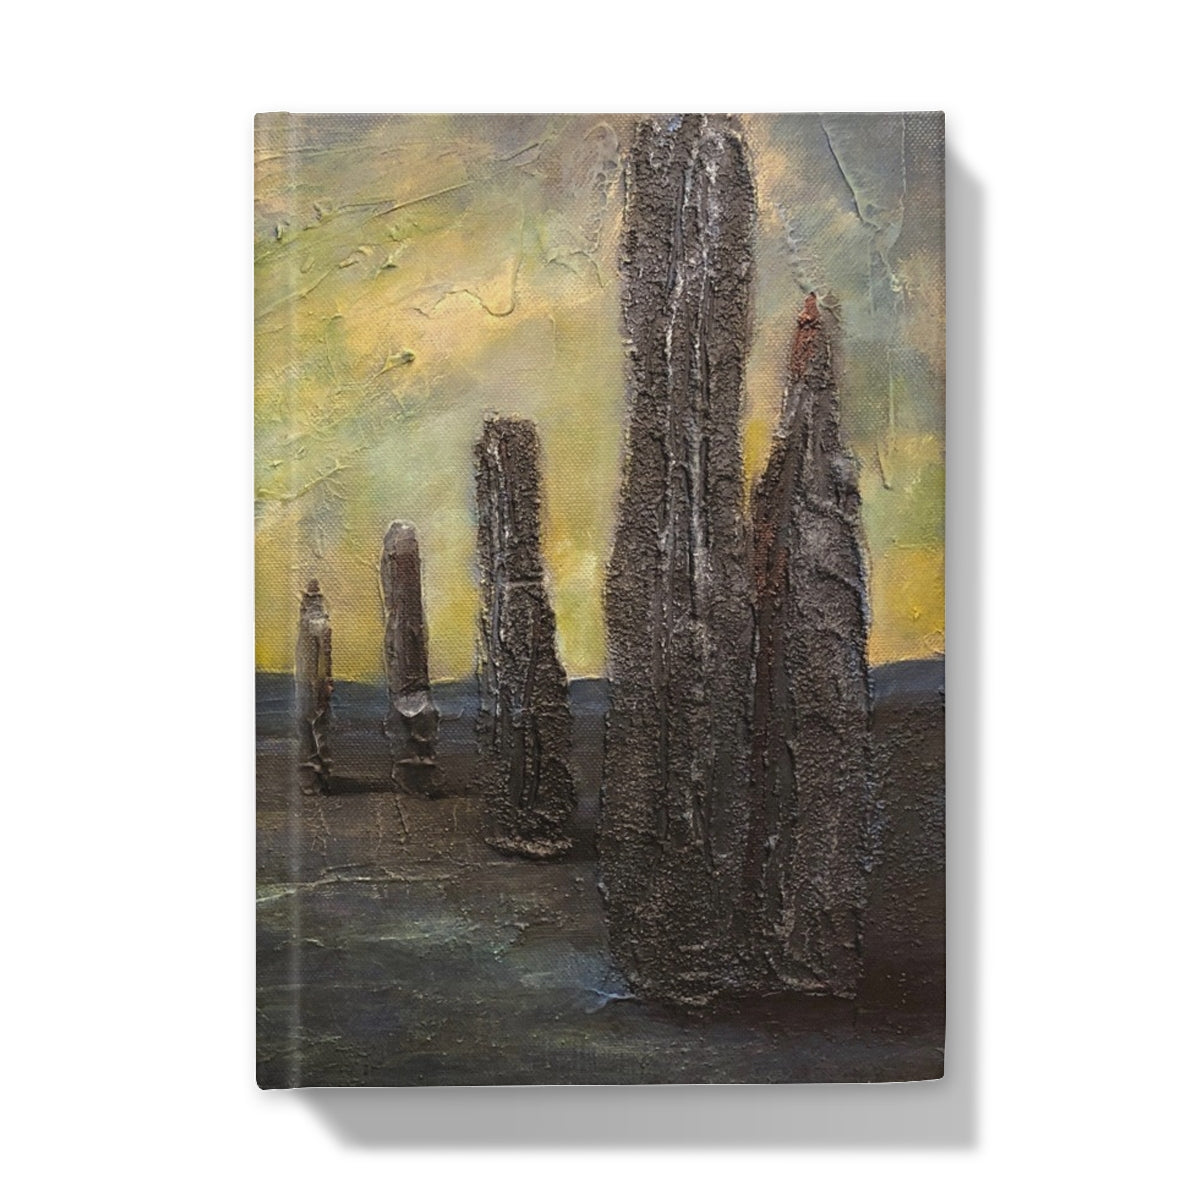 An Ethereal Ring Of Brodgar Art Gifts Hardback Journal-Journals & Notebooks-Orkney Art Gallery-A4-Lined-Paintings, Prints, Homeware, Art Gifts From Scotland By Scottish Artist Kevin Hunter